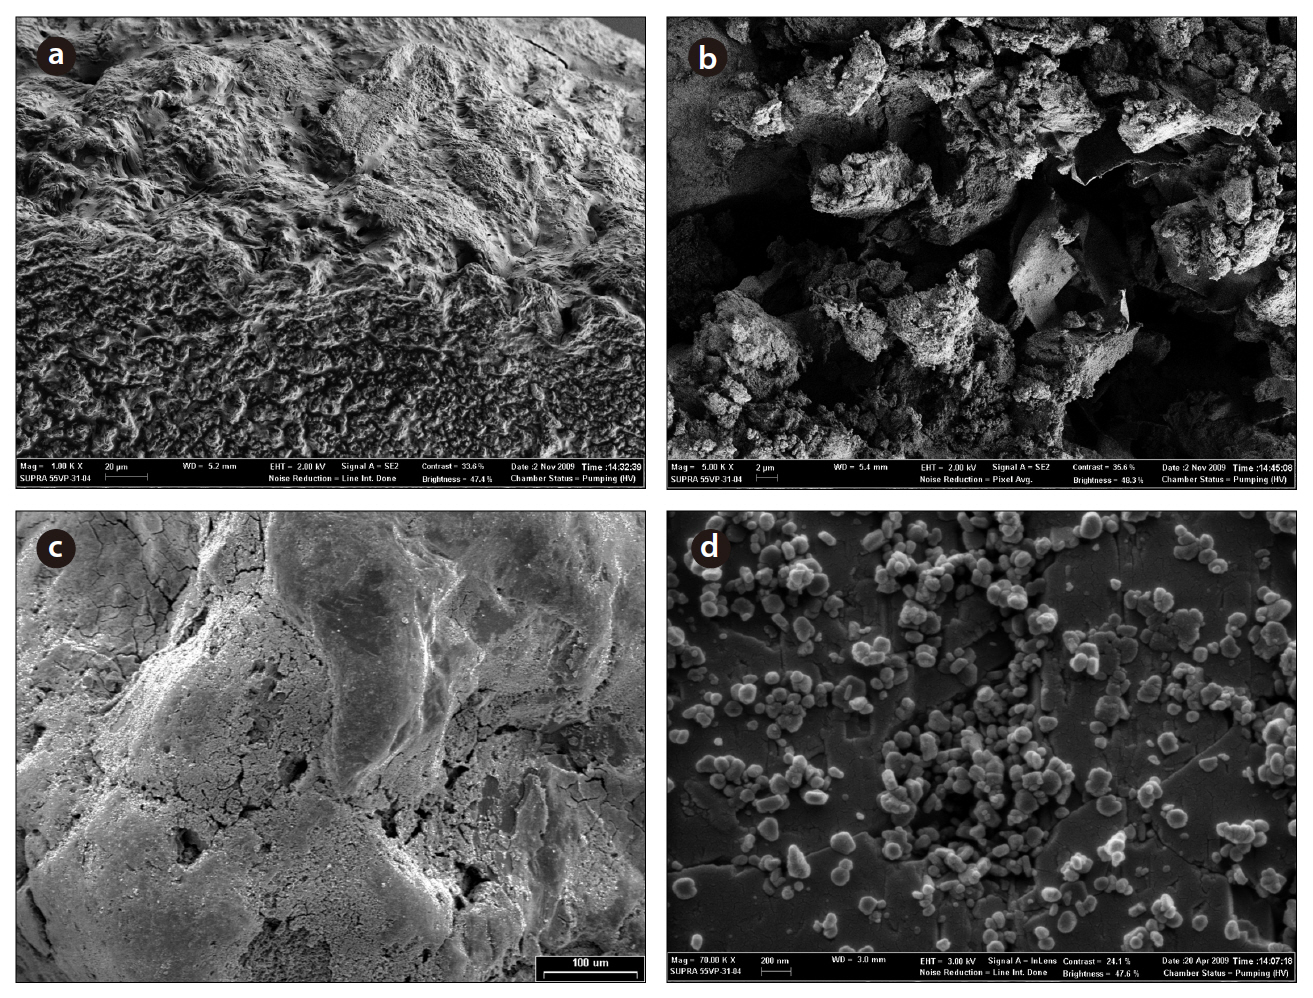 Field emission scanning electron microscope images: (a) cross-sectional view of a calcium alginate bead (bar = 20 ㎛) (b) crosssectional view of layered double hydroxides immobilized on a calcium alginate bead (bar = 2 ㎛) (c) surface view of iron hydroxide-coated sand (bar = 100 ㎛) and (d) surface view of hematite-coated sand (bar = 200 nm).